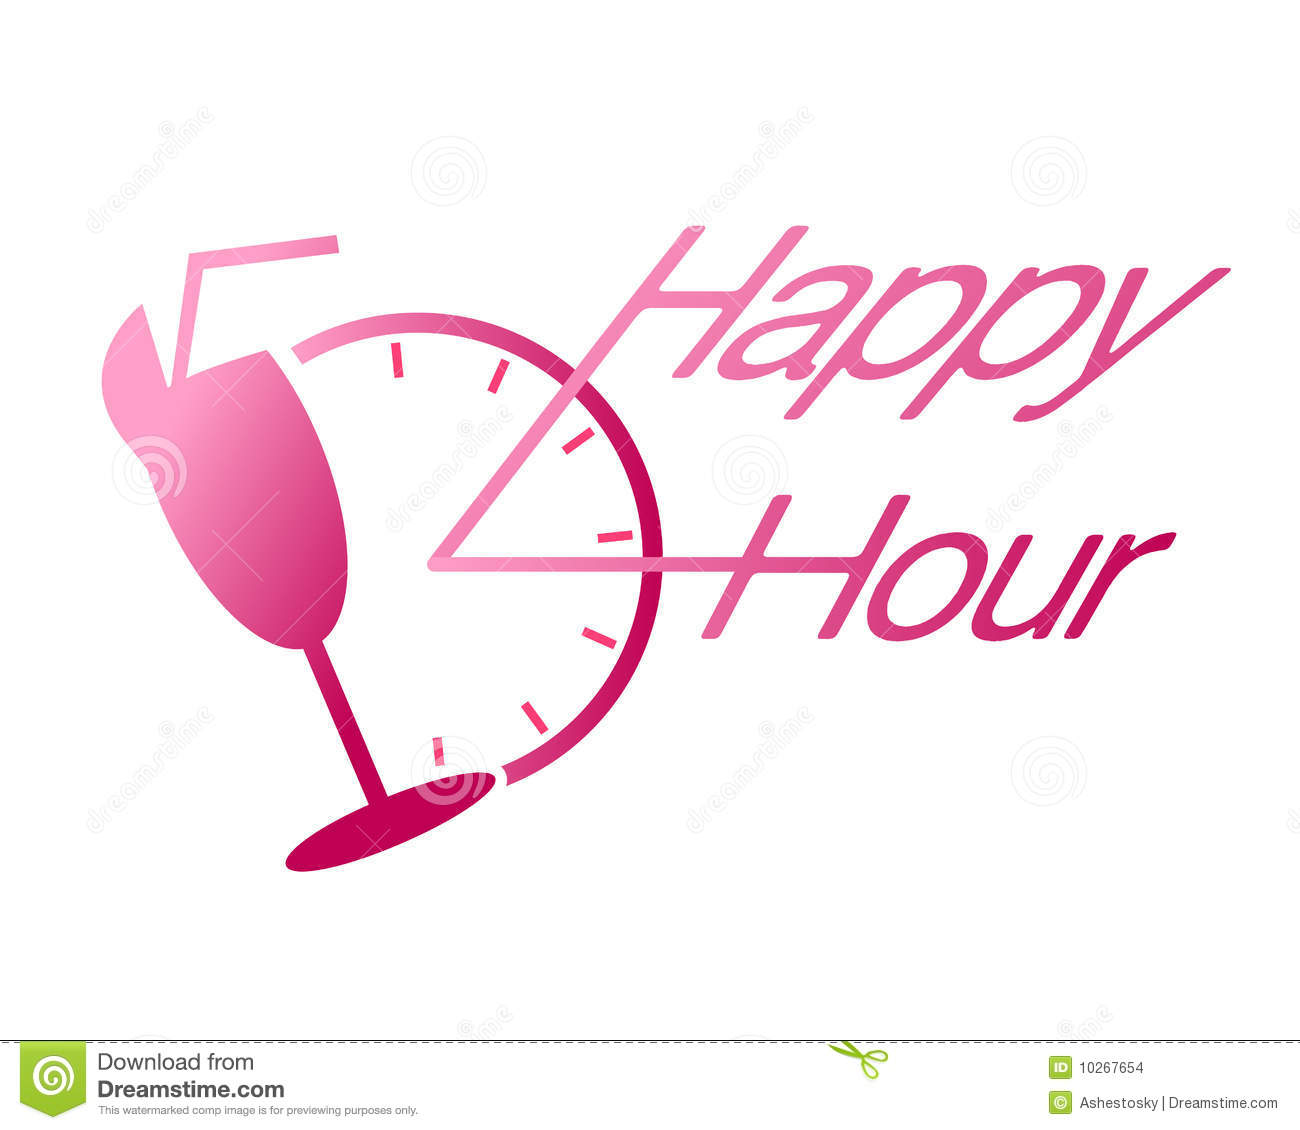 And Drink As Happy Hour Commercial Design Useful For Bars And Clubs